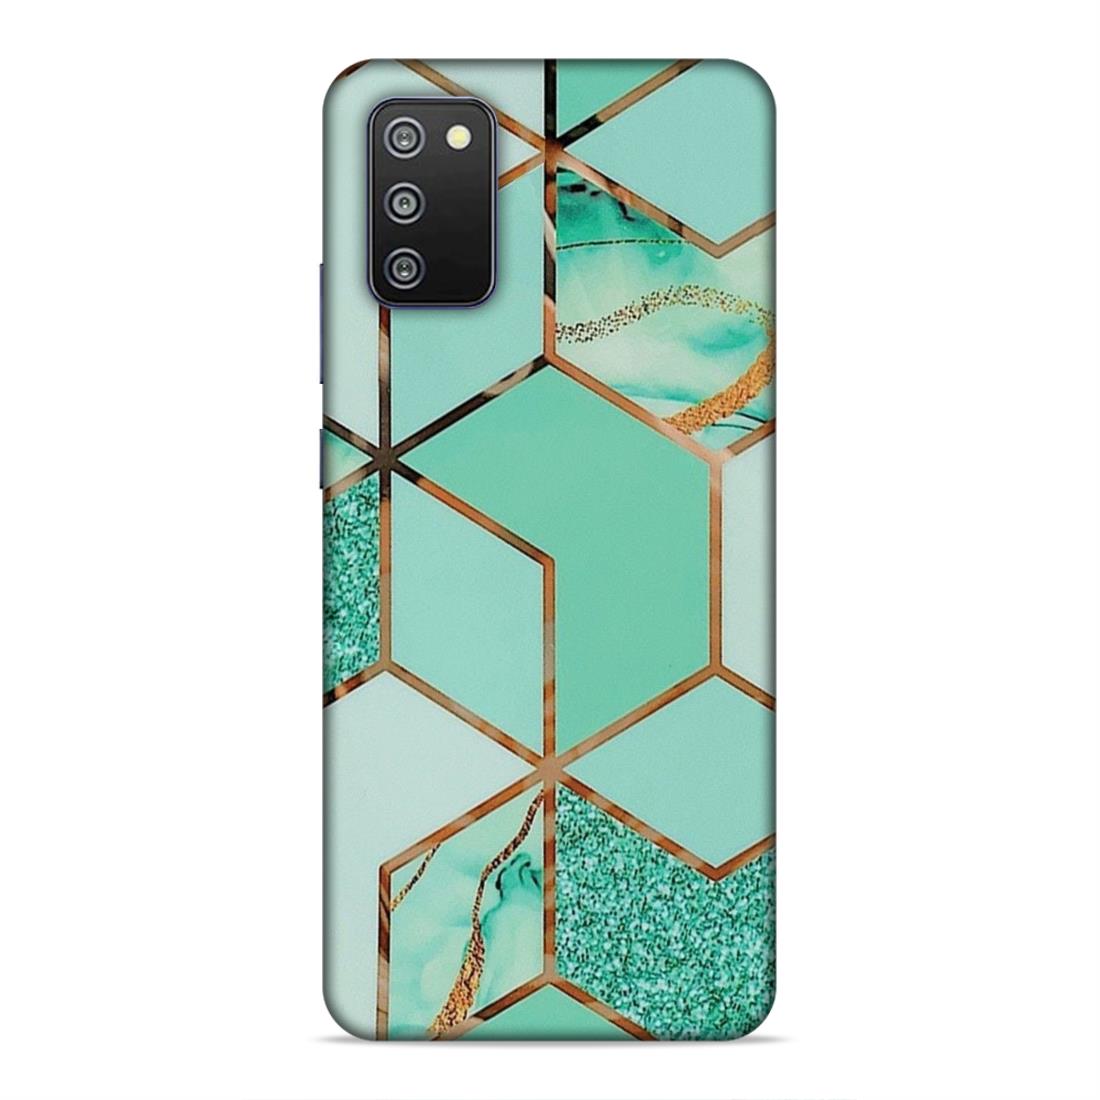 Hexagonal Marble Pattern Hard Back Case For Samsung Galaxy A03s / F02s / M02s